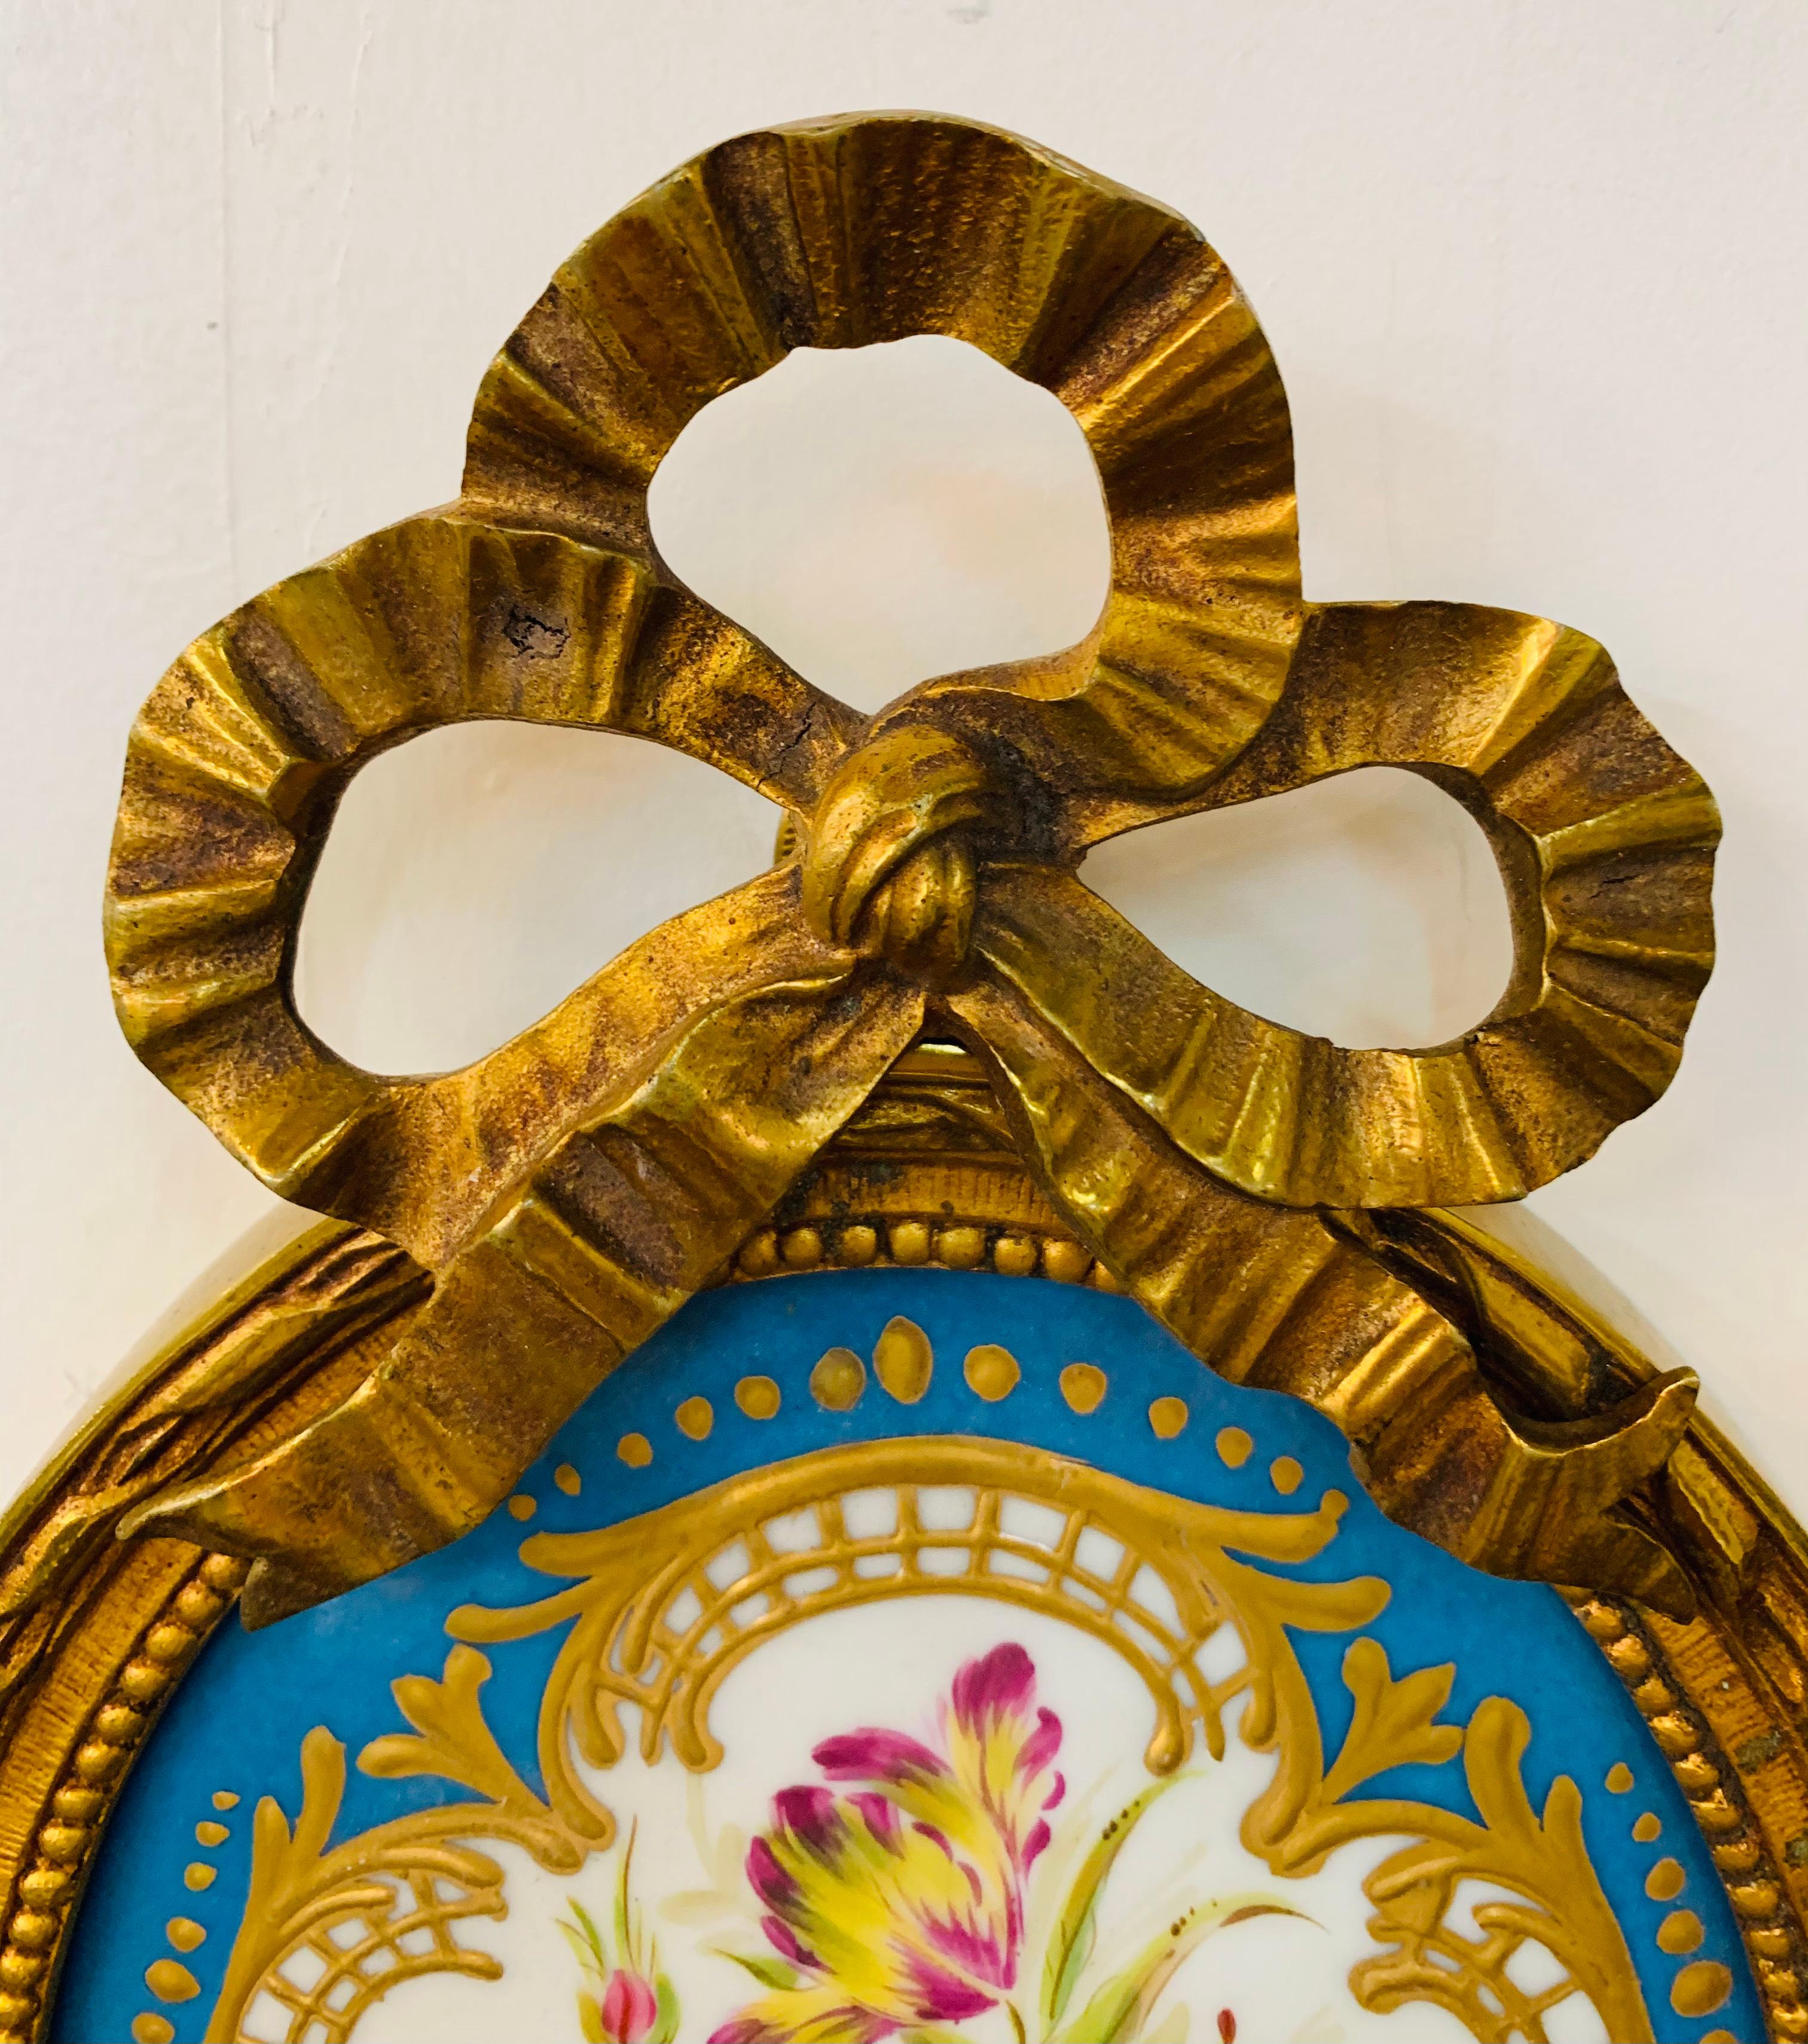 An elegant 19th French century ormolu sconce with Limoges hand painted porcelain. The two candelabra lights sconce features a fine oval shaped porcelain with center flowers design in blue, pink, white and gold elegantly framed and topped with a